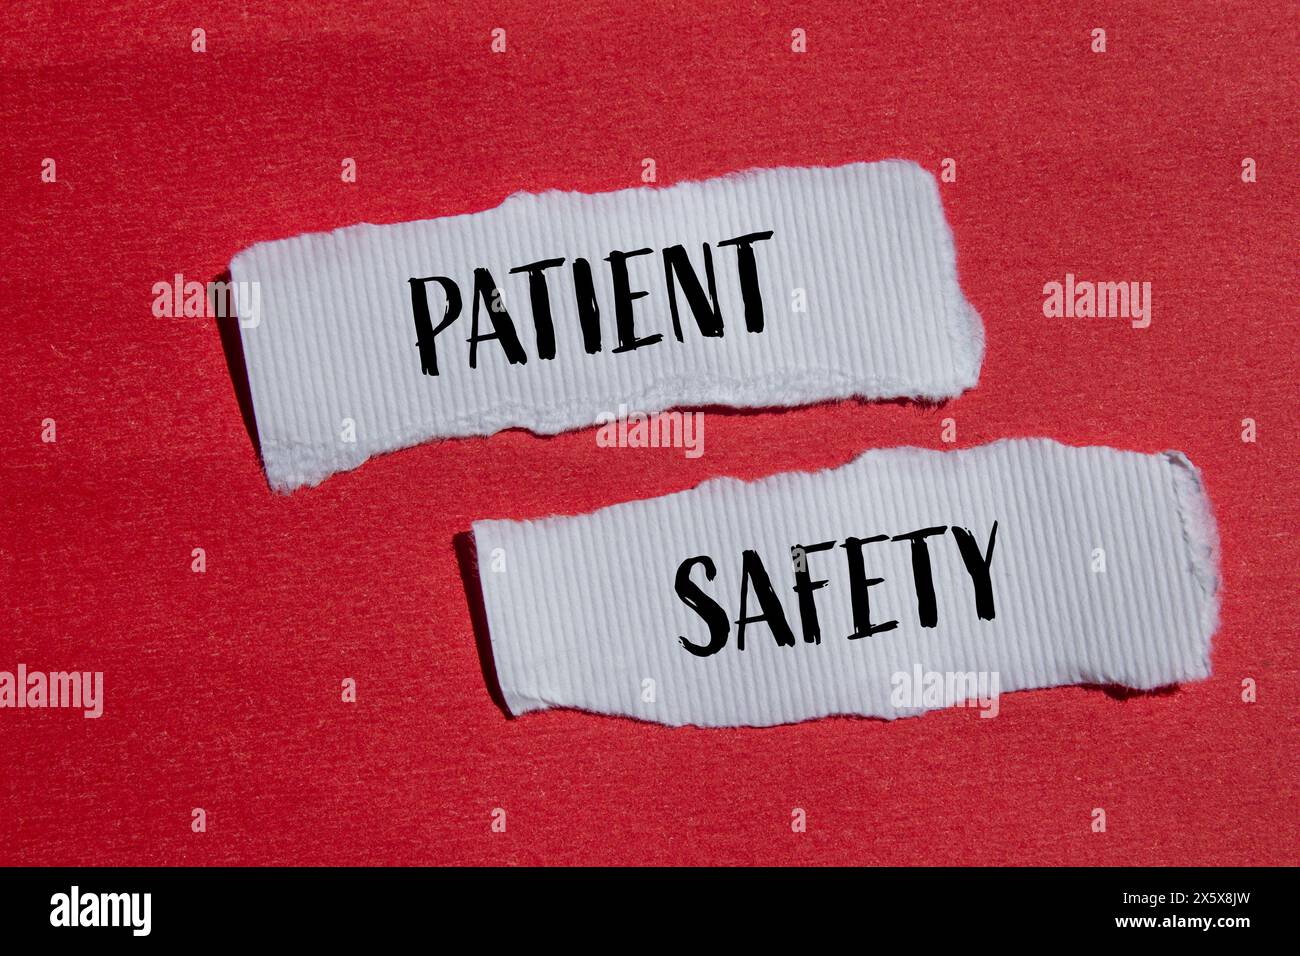 Patient safety words written on ripped white paper pieces with red background. Conceptual patient safety symbol. Copy space. Stock Photo